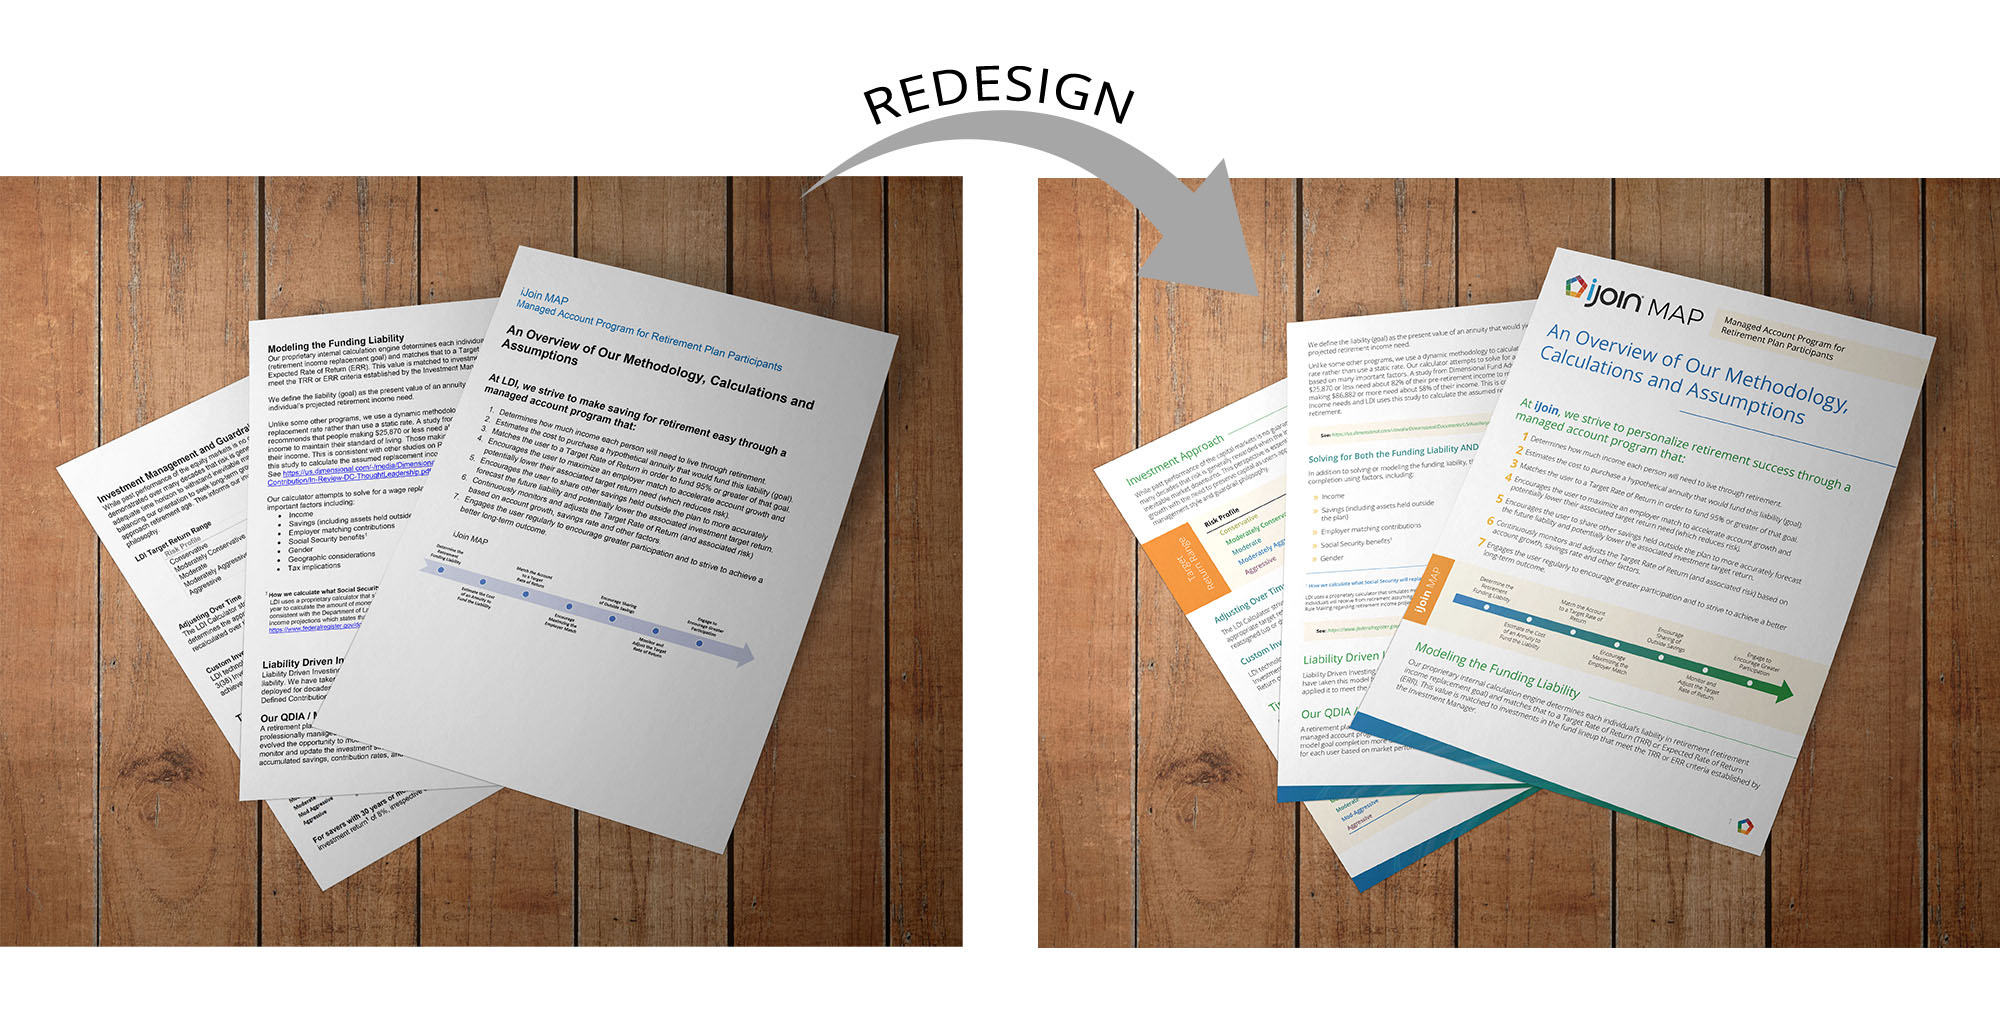 before-and-after whitepaper redesign